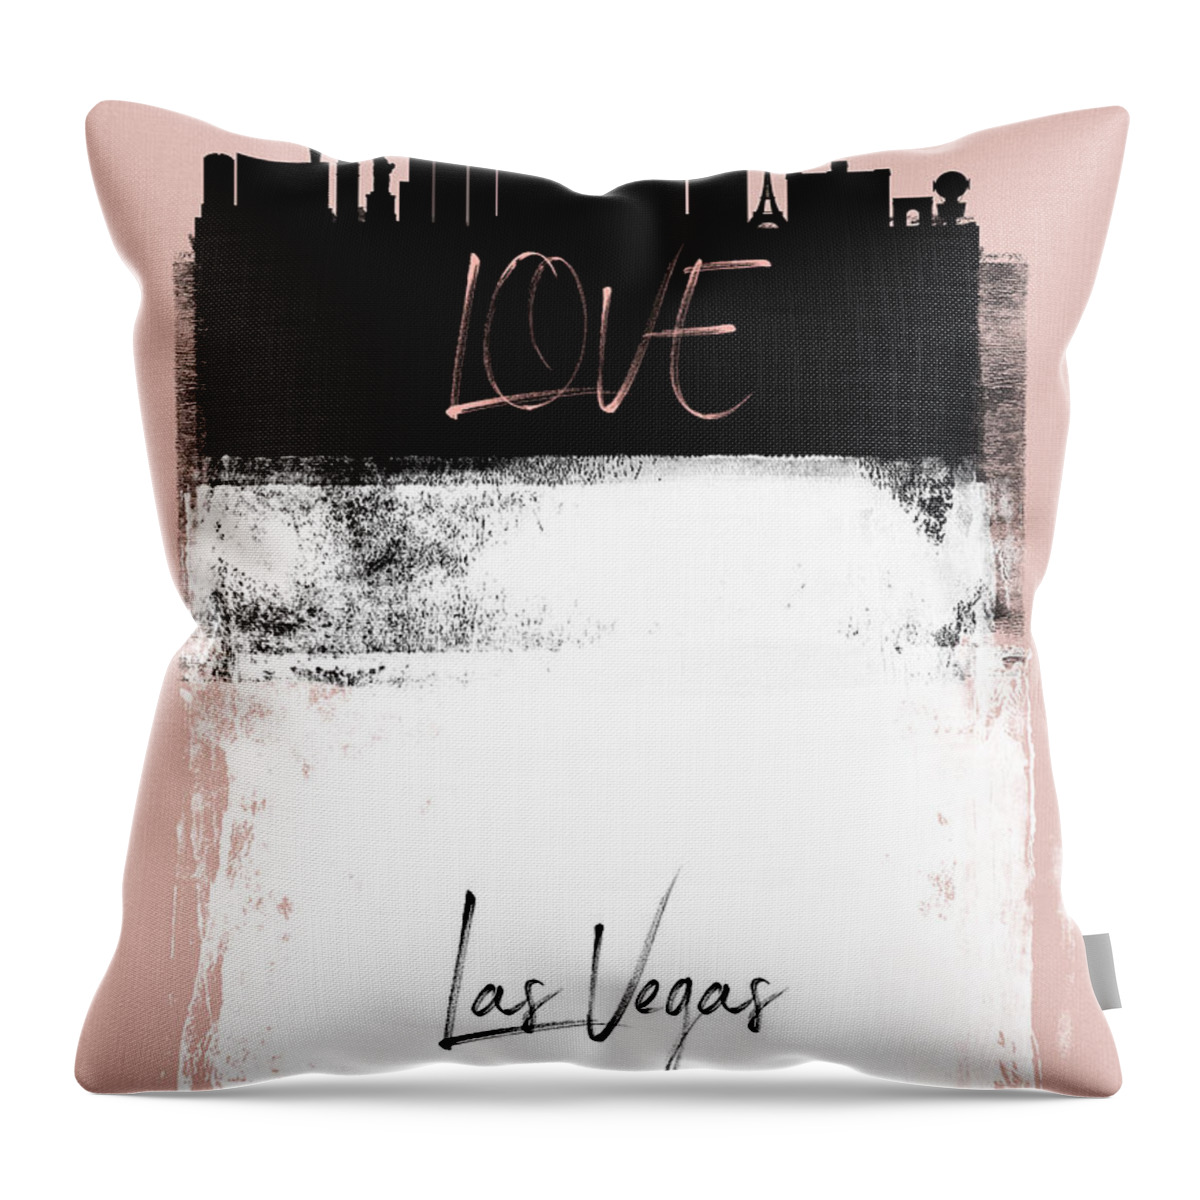 Dallas Throw Pillow featuring the mixed media Love Dallas by Naxart Studio